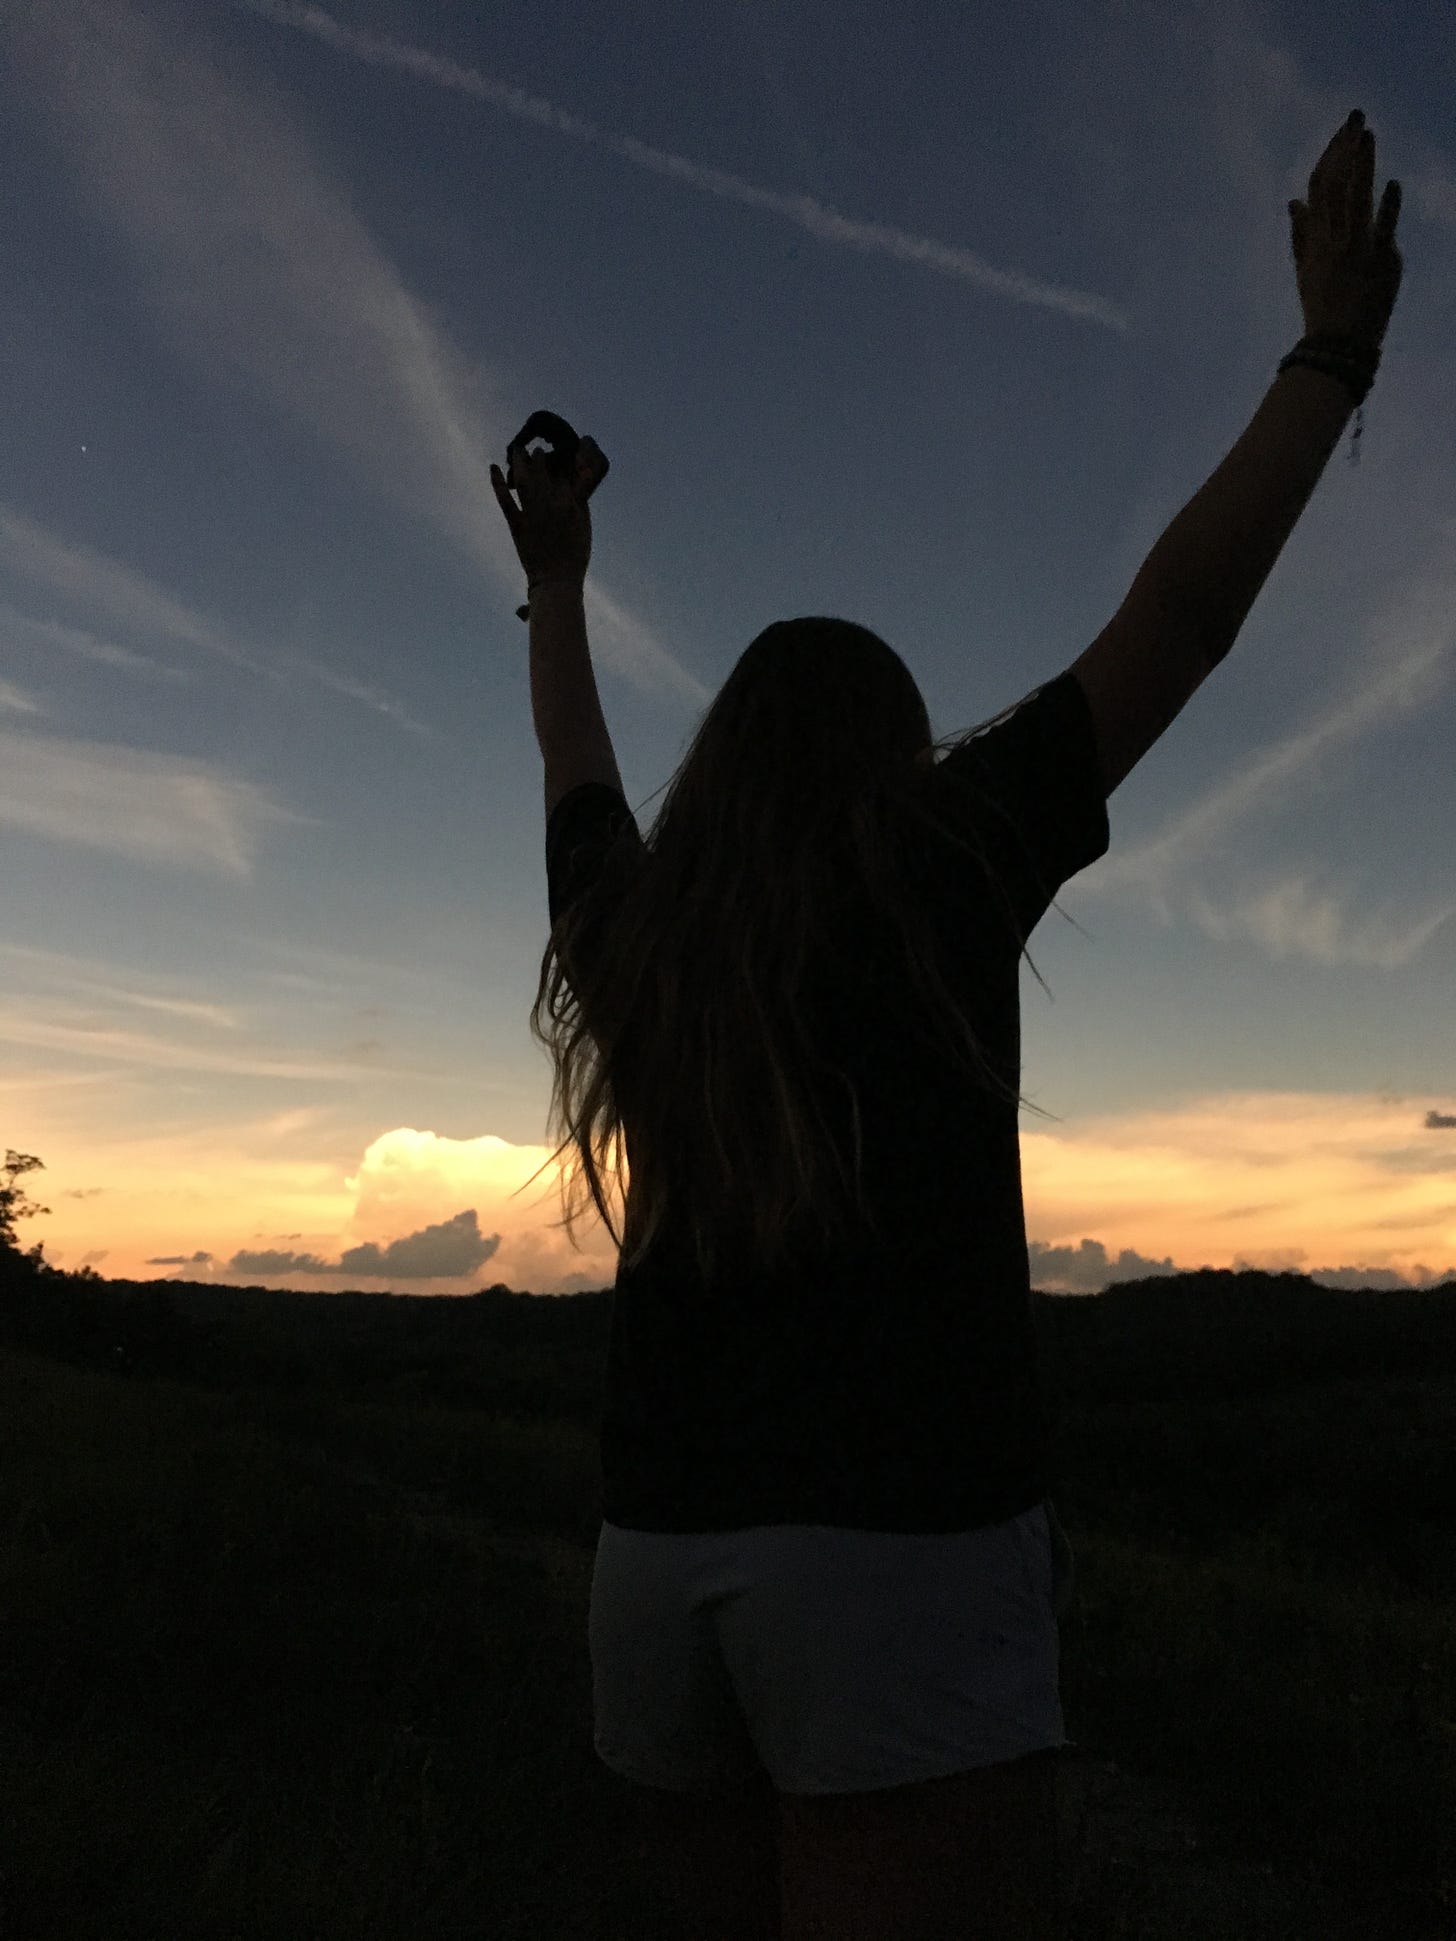 Silhouette of person with arms raised beneath a darkened solar-eclipse sky with the lit clouds on the horizon.